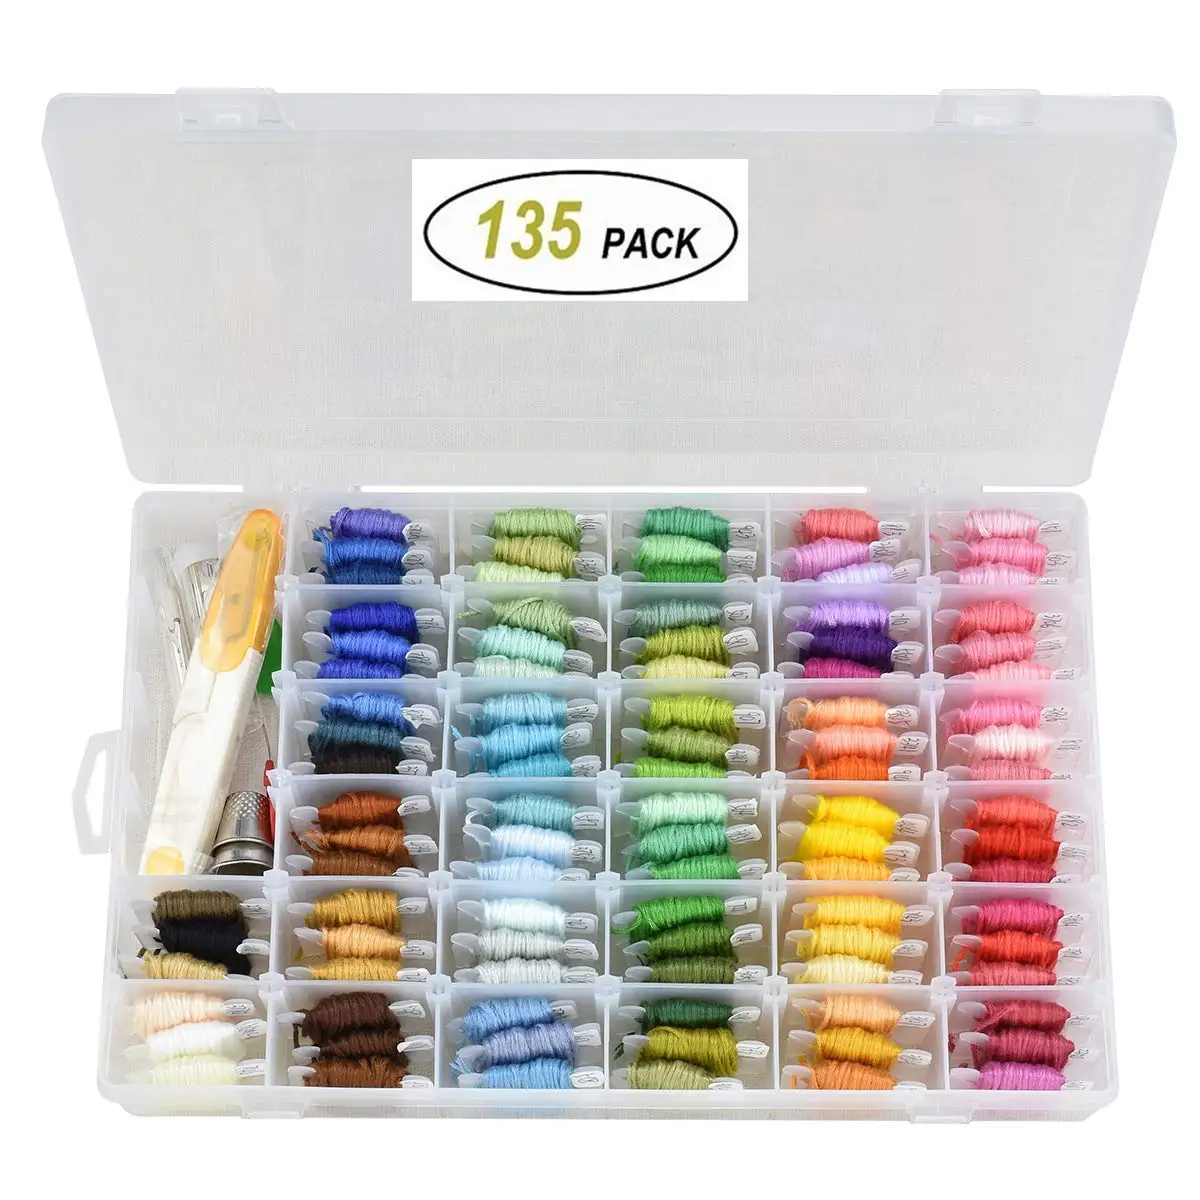 Electop Embroidery Floss 100 Skeins with 34 Pieces Cross Stitch Tool Kit Rainbow Color Cross Stitch Threads Friendship Bracelets Floss String Crafts Floss